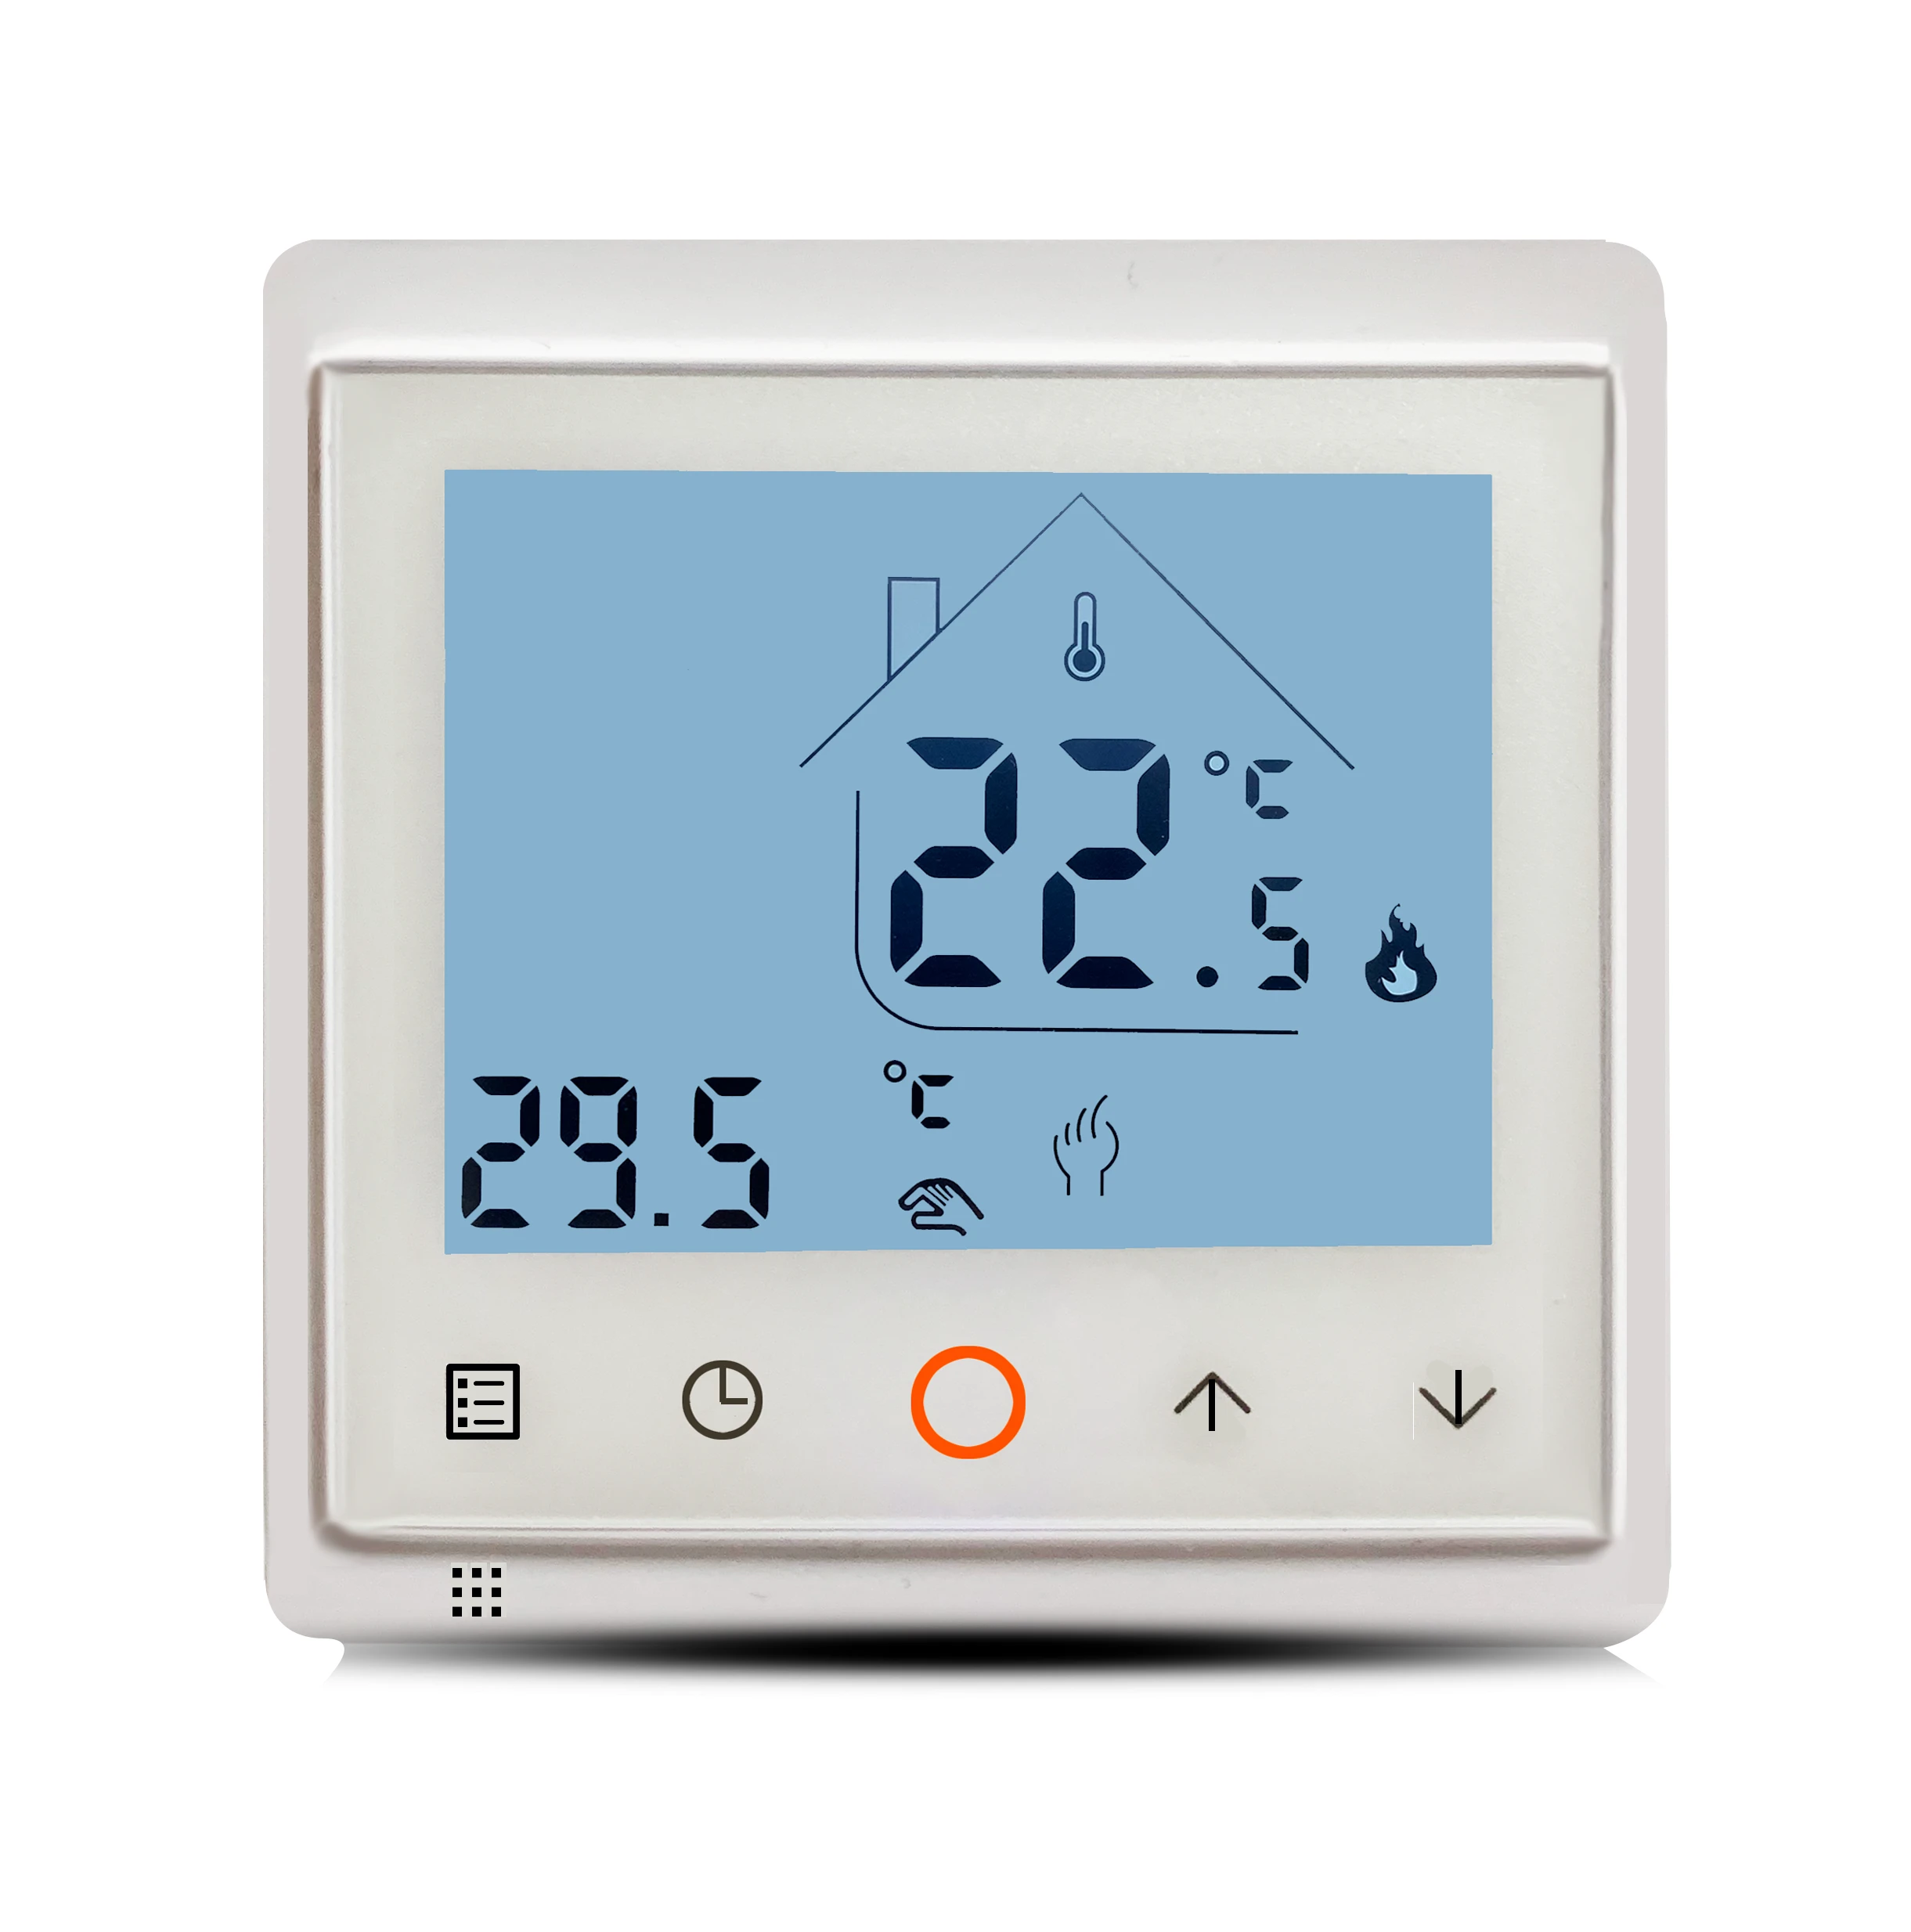 HVAC heating and cooling controller Wifi control thermostat Underfloor Heating Room Thermostat with programmable